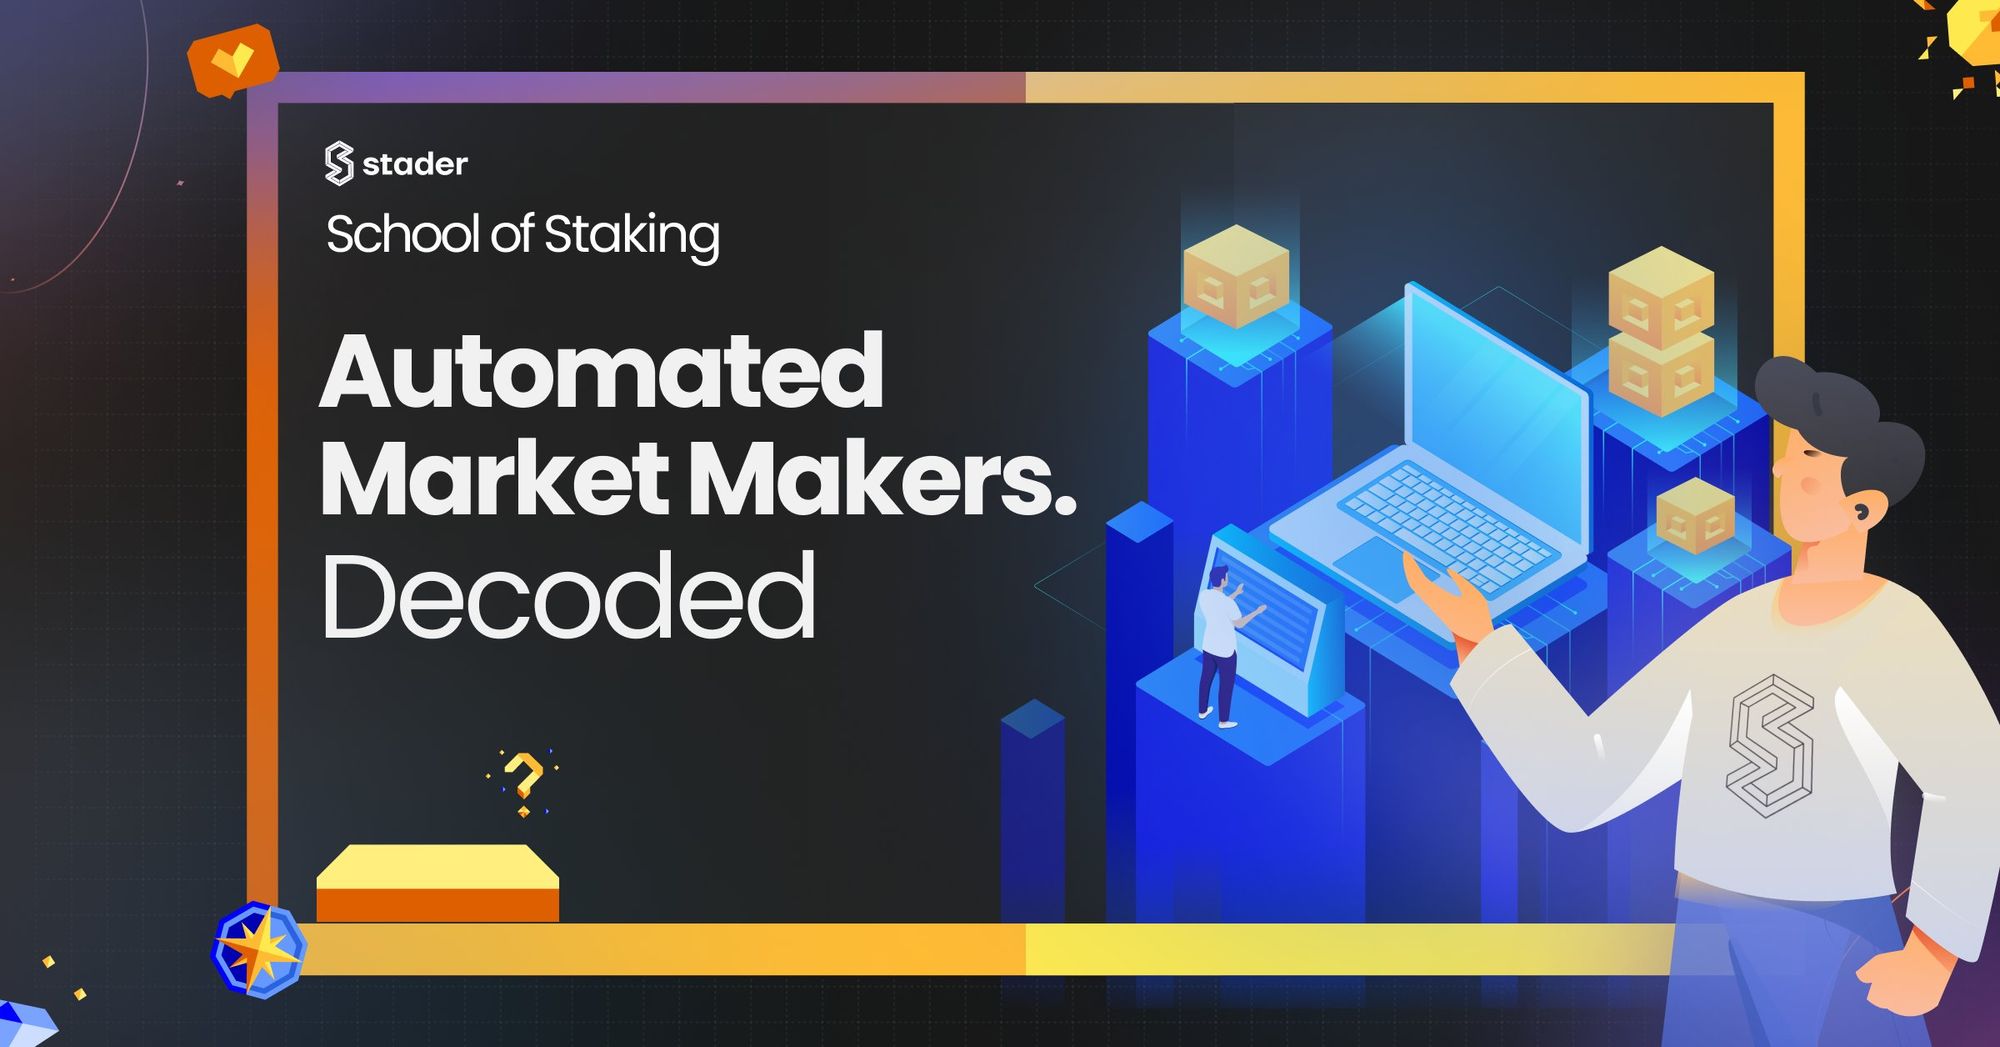 What are automated market makers in DeFi?